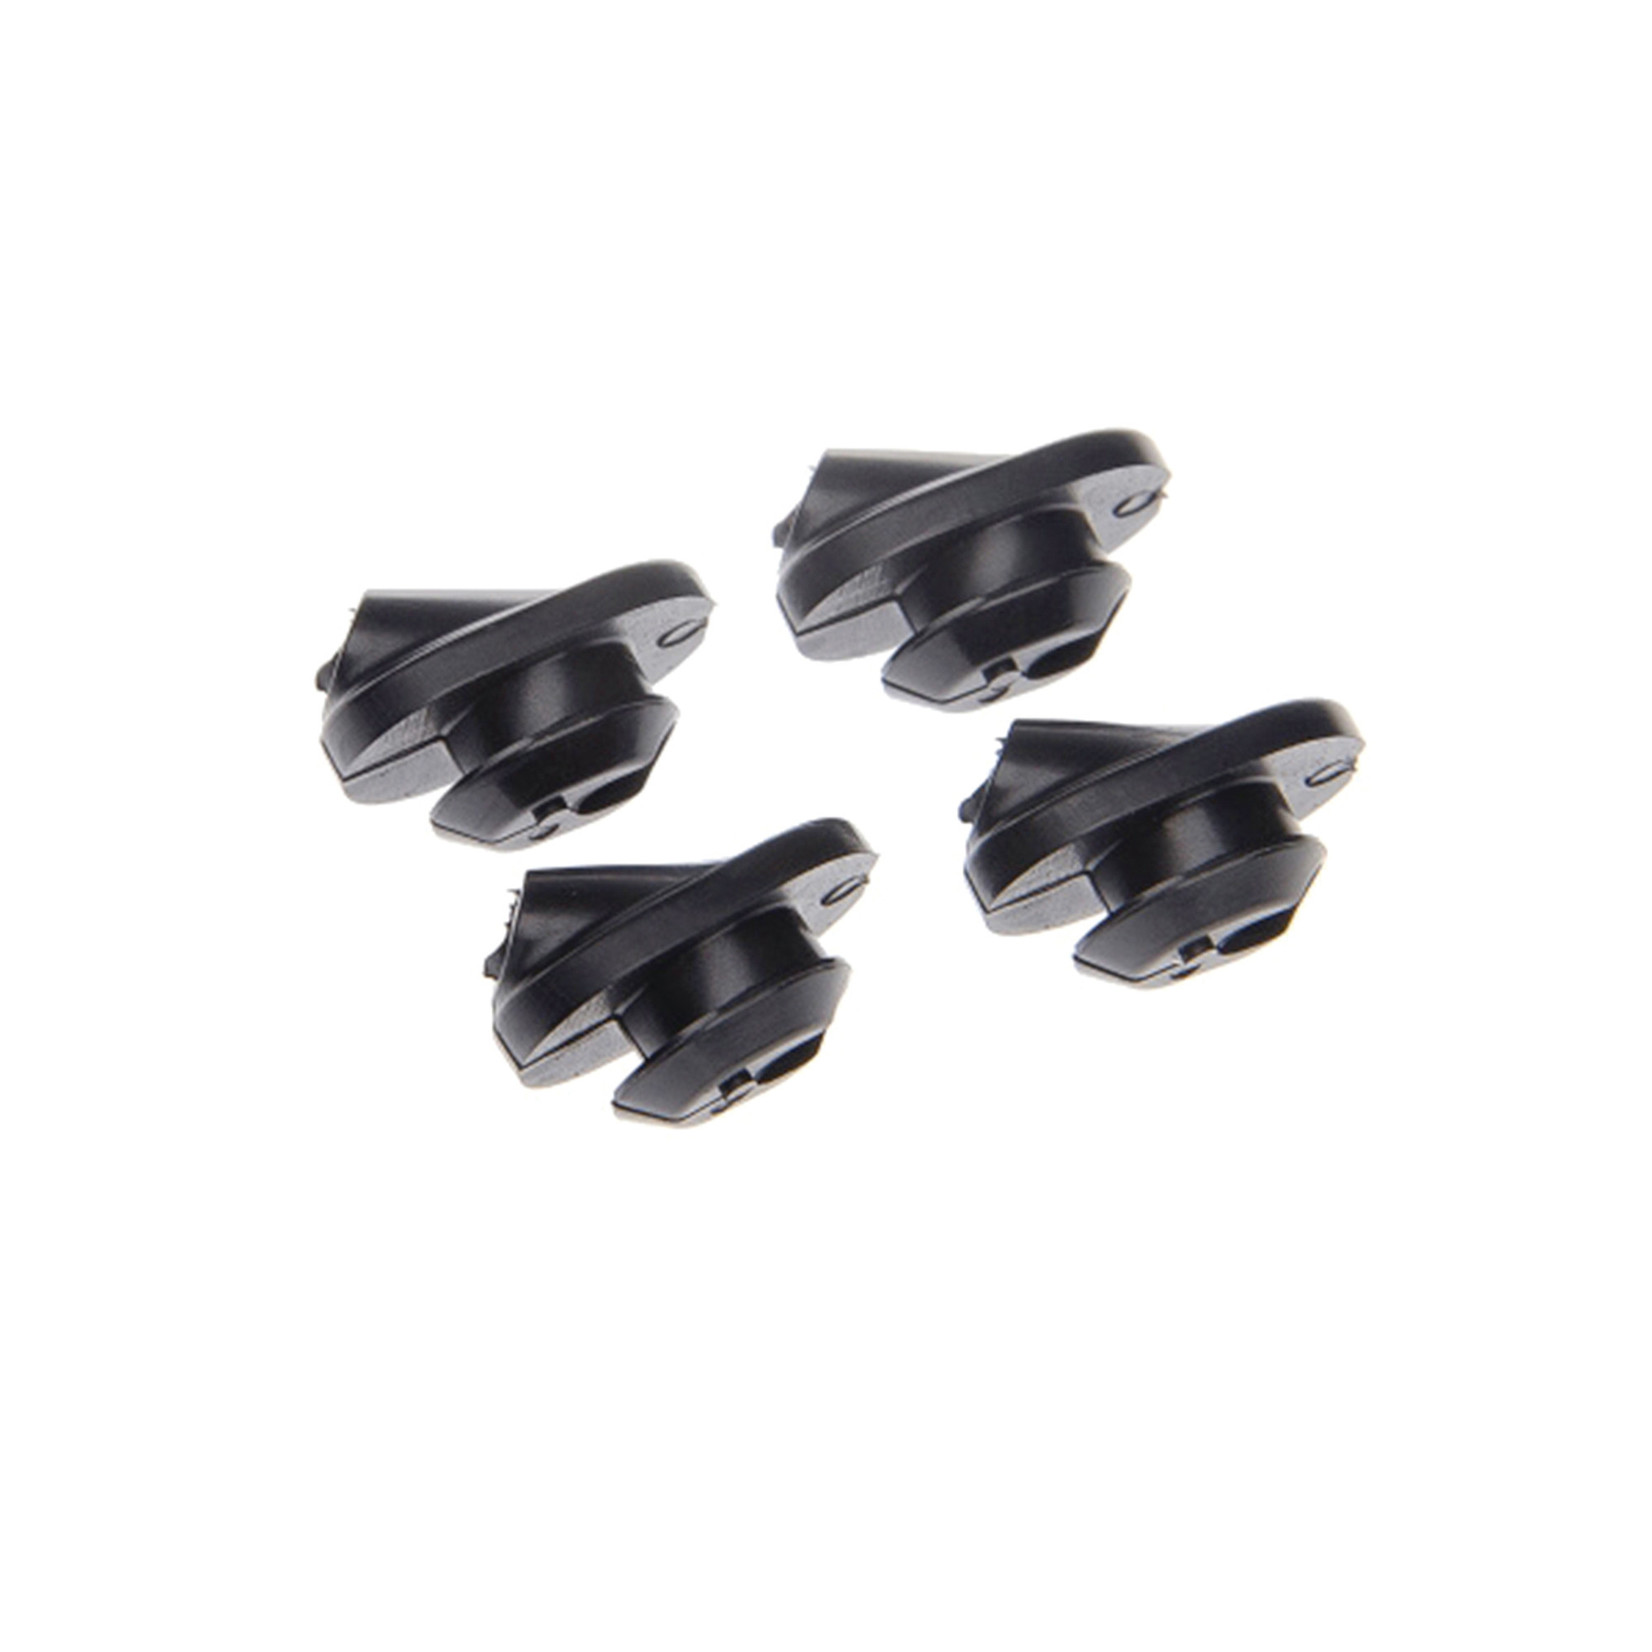 SHIMANO Shimano SM-GM01 Grommet for SD50 Di2 Wire (6mm), Set of 4